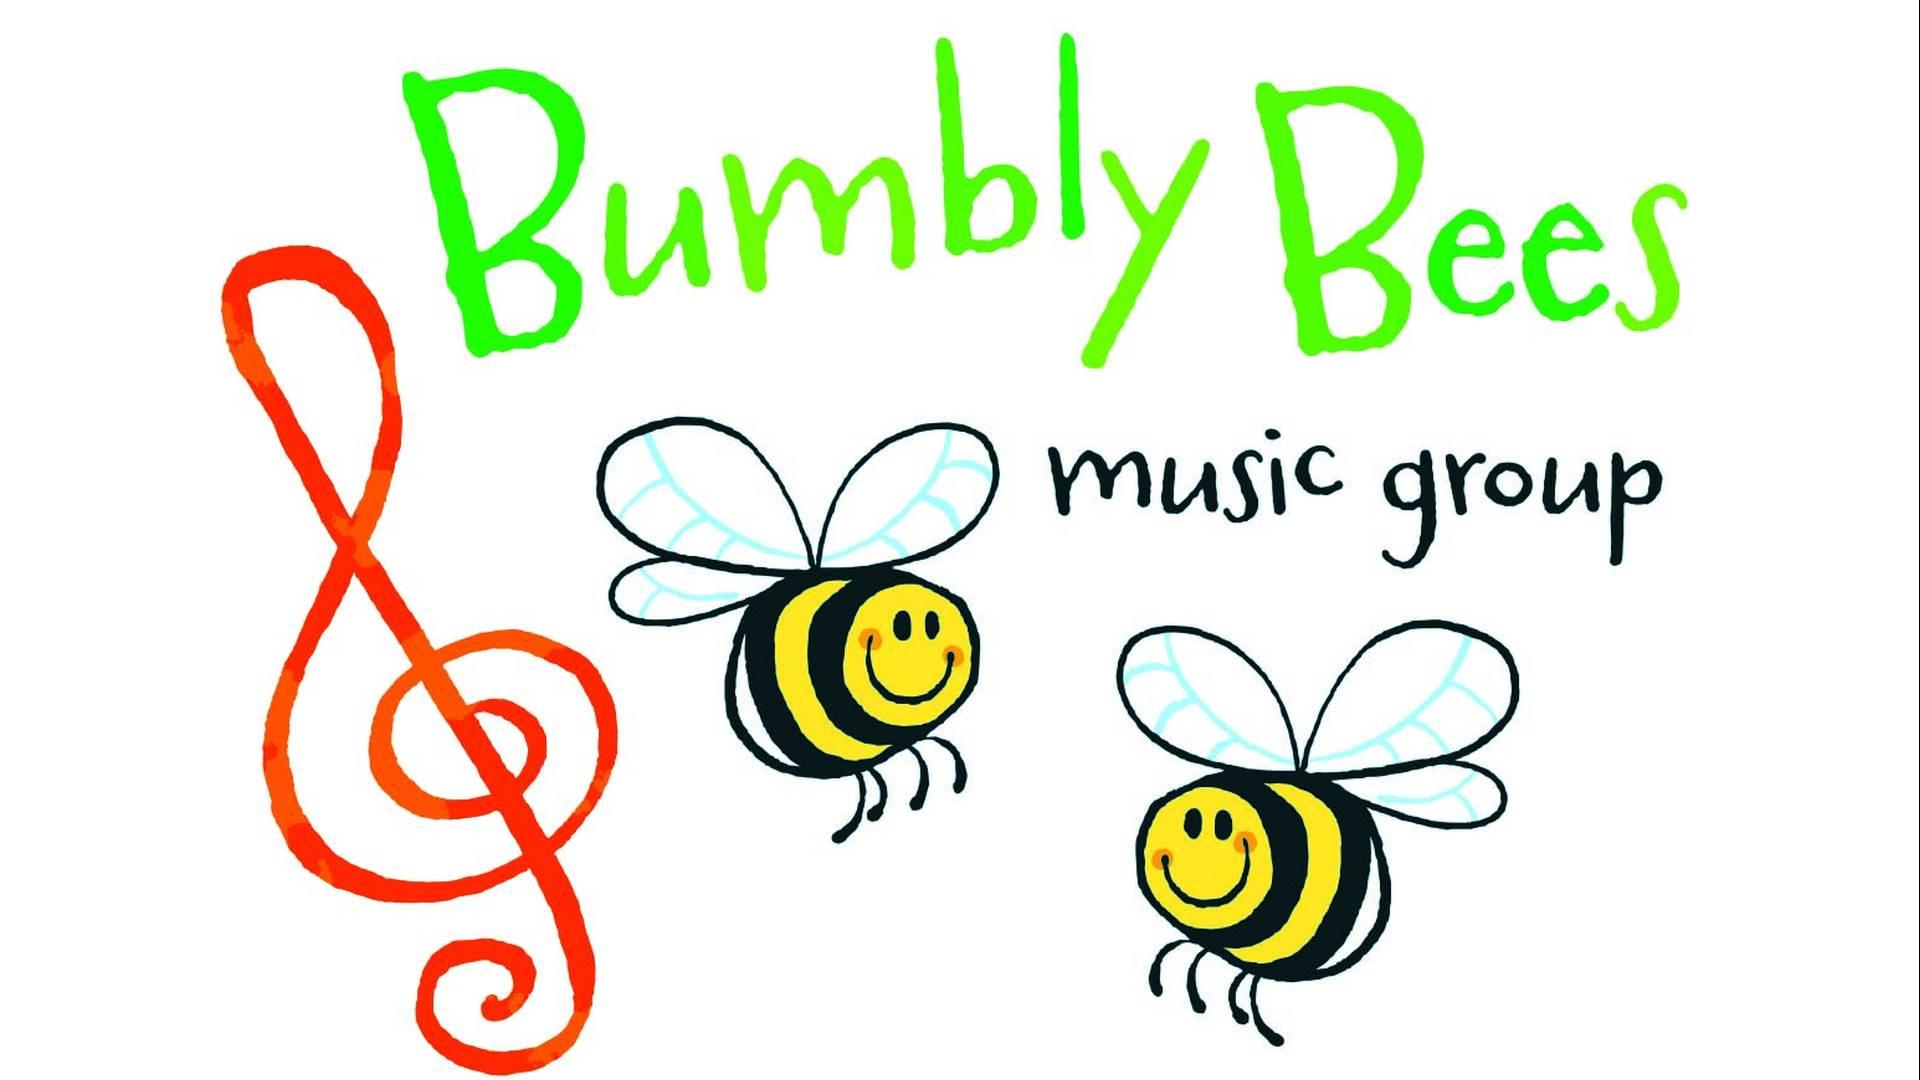 Bumbly bees music group soham photo